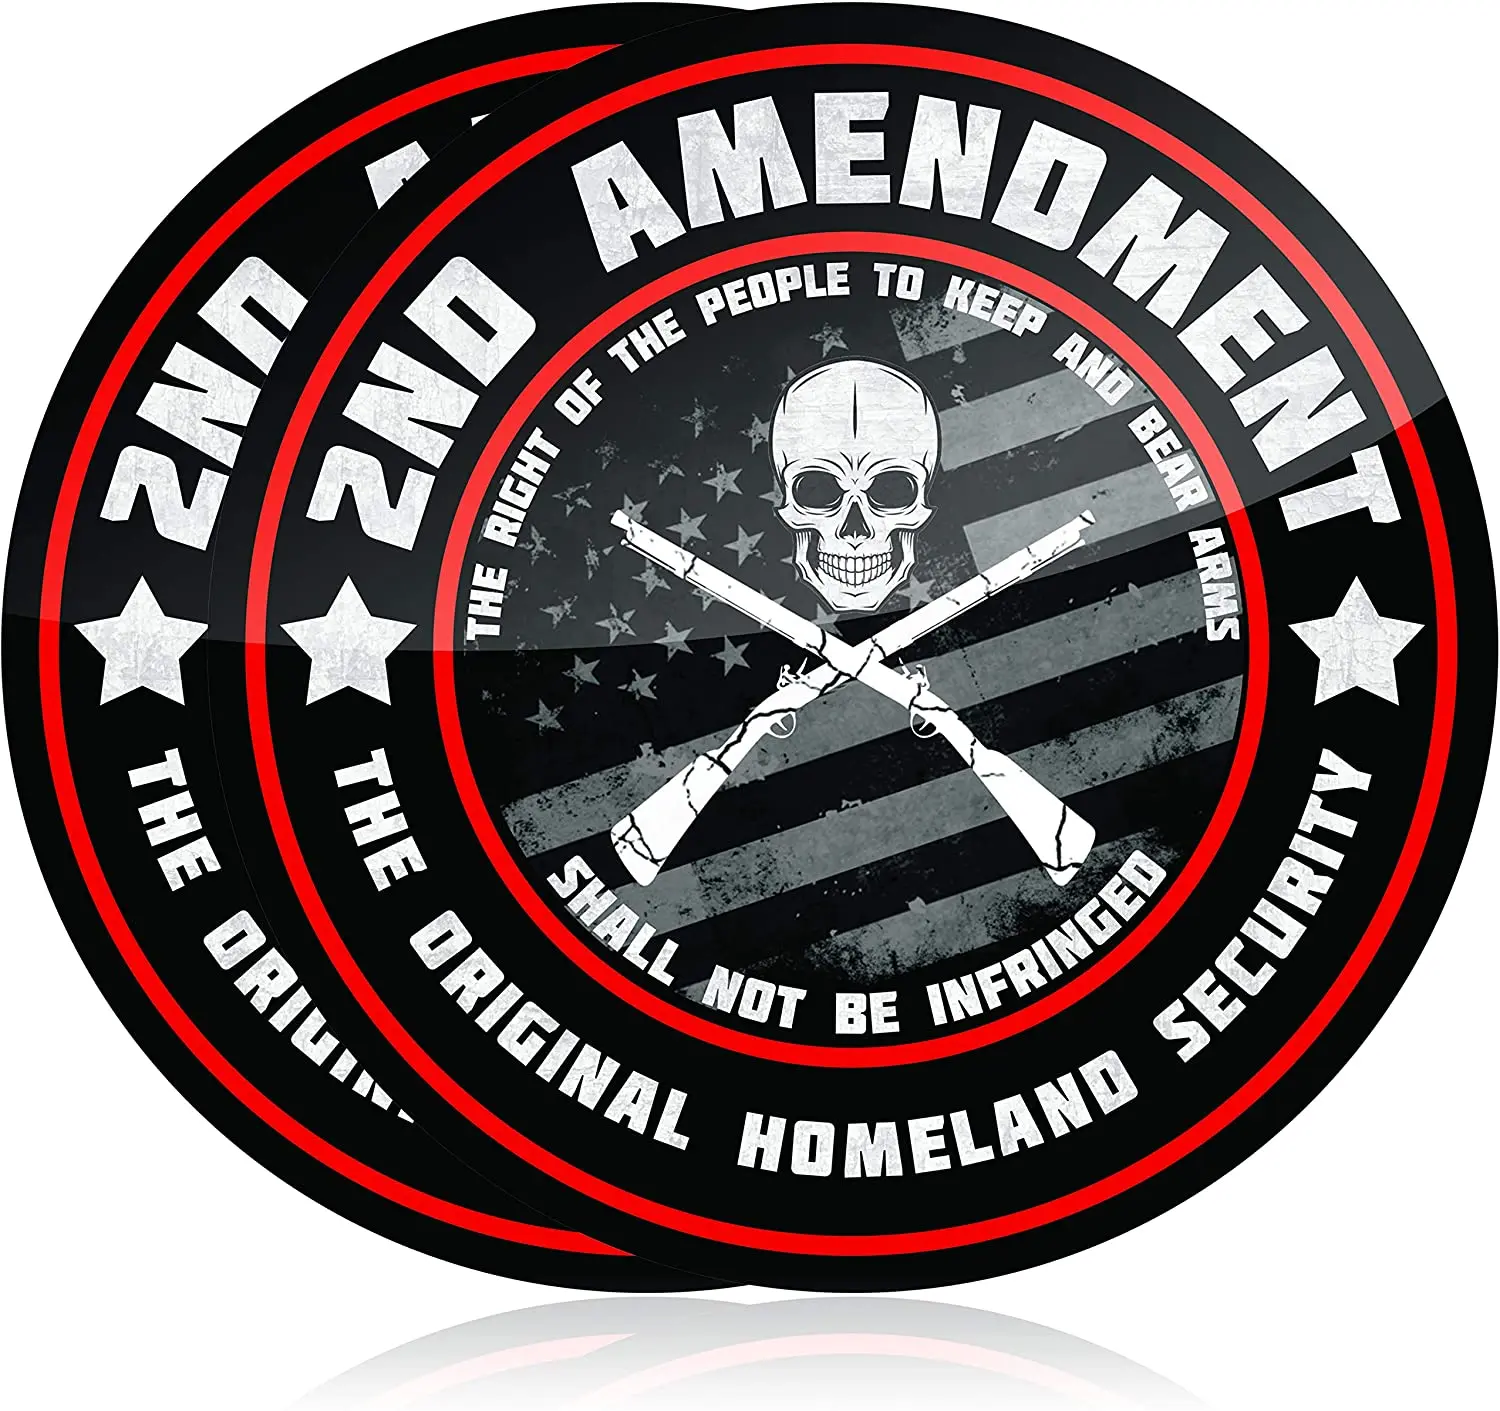 

Premium 2nd Amendment Stickers (2 Pack) Diameter Great for Your Truck or Toolbox High Quality KK Vinyl Cover Scratches PVC